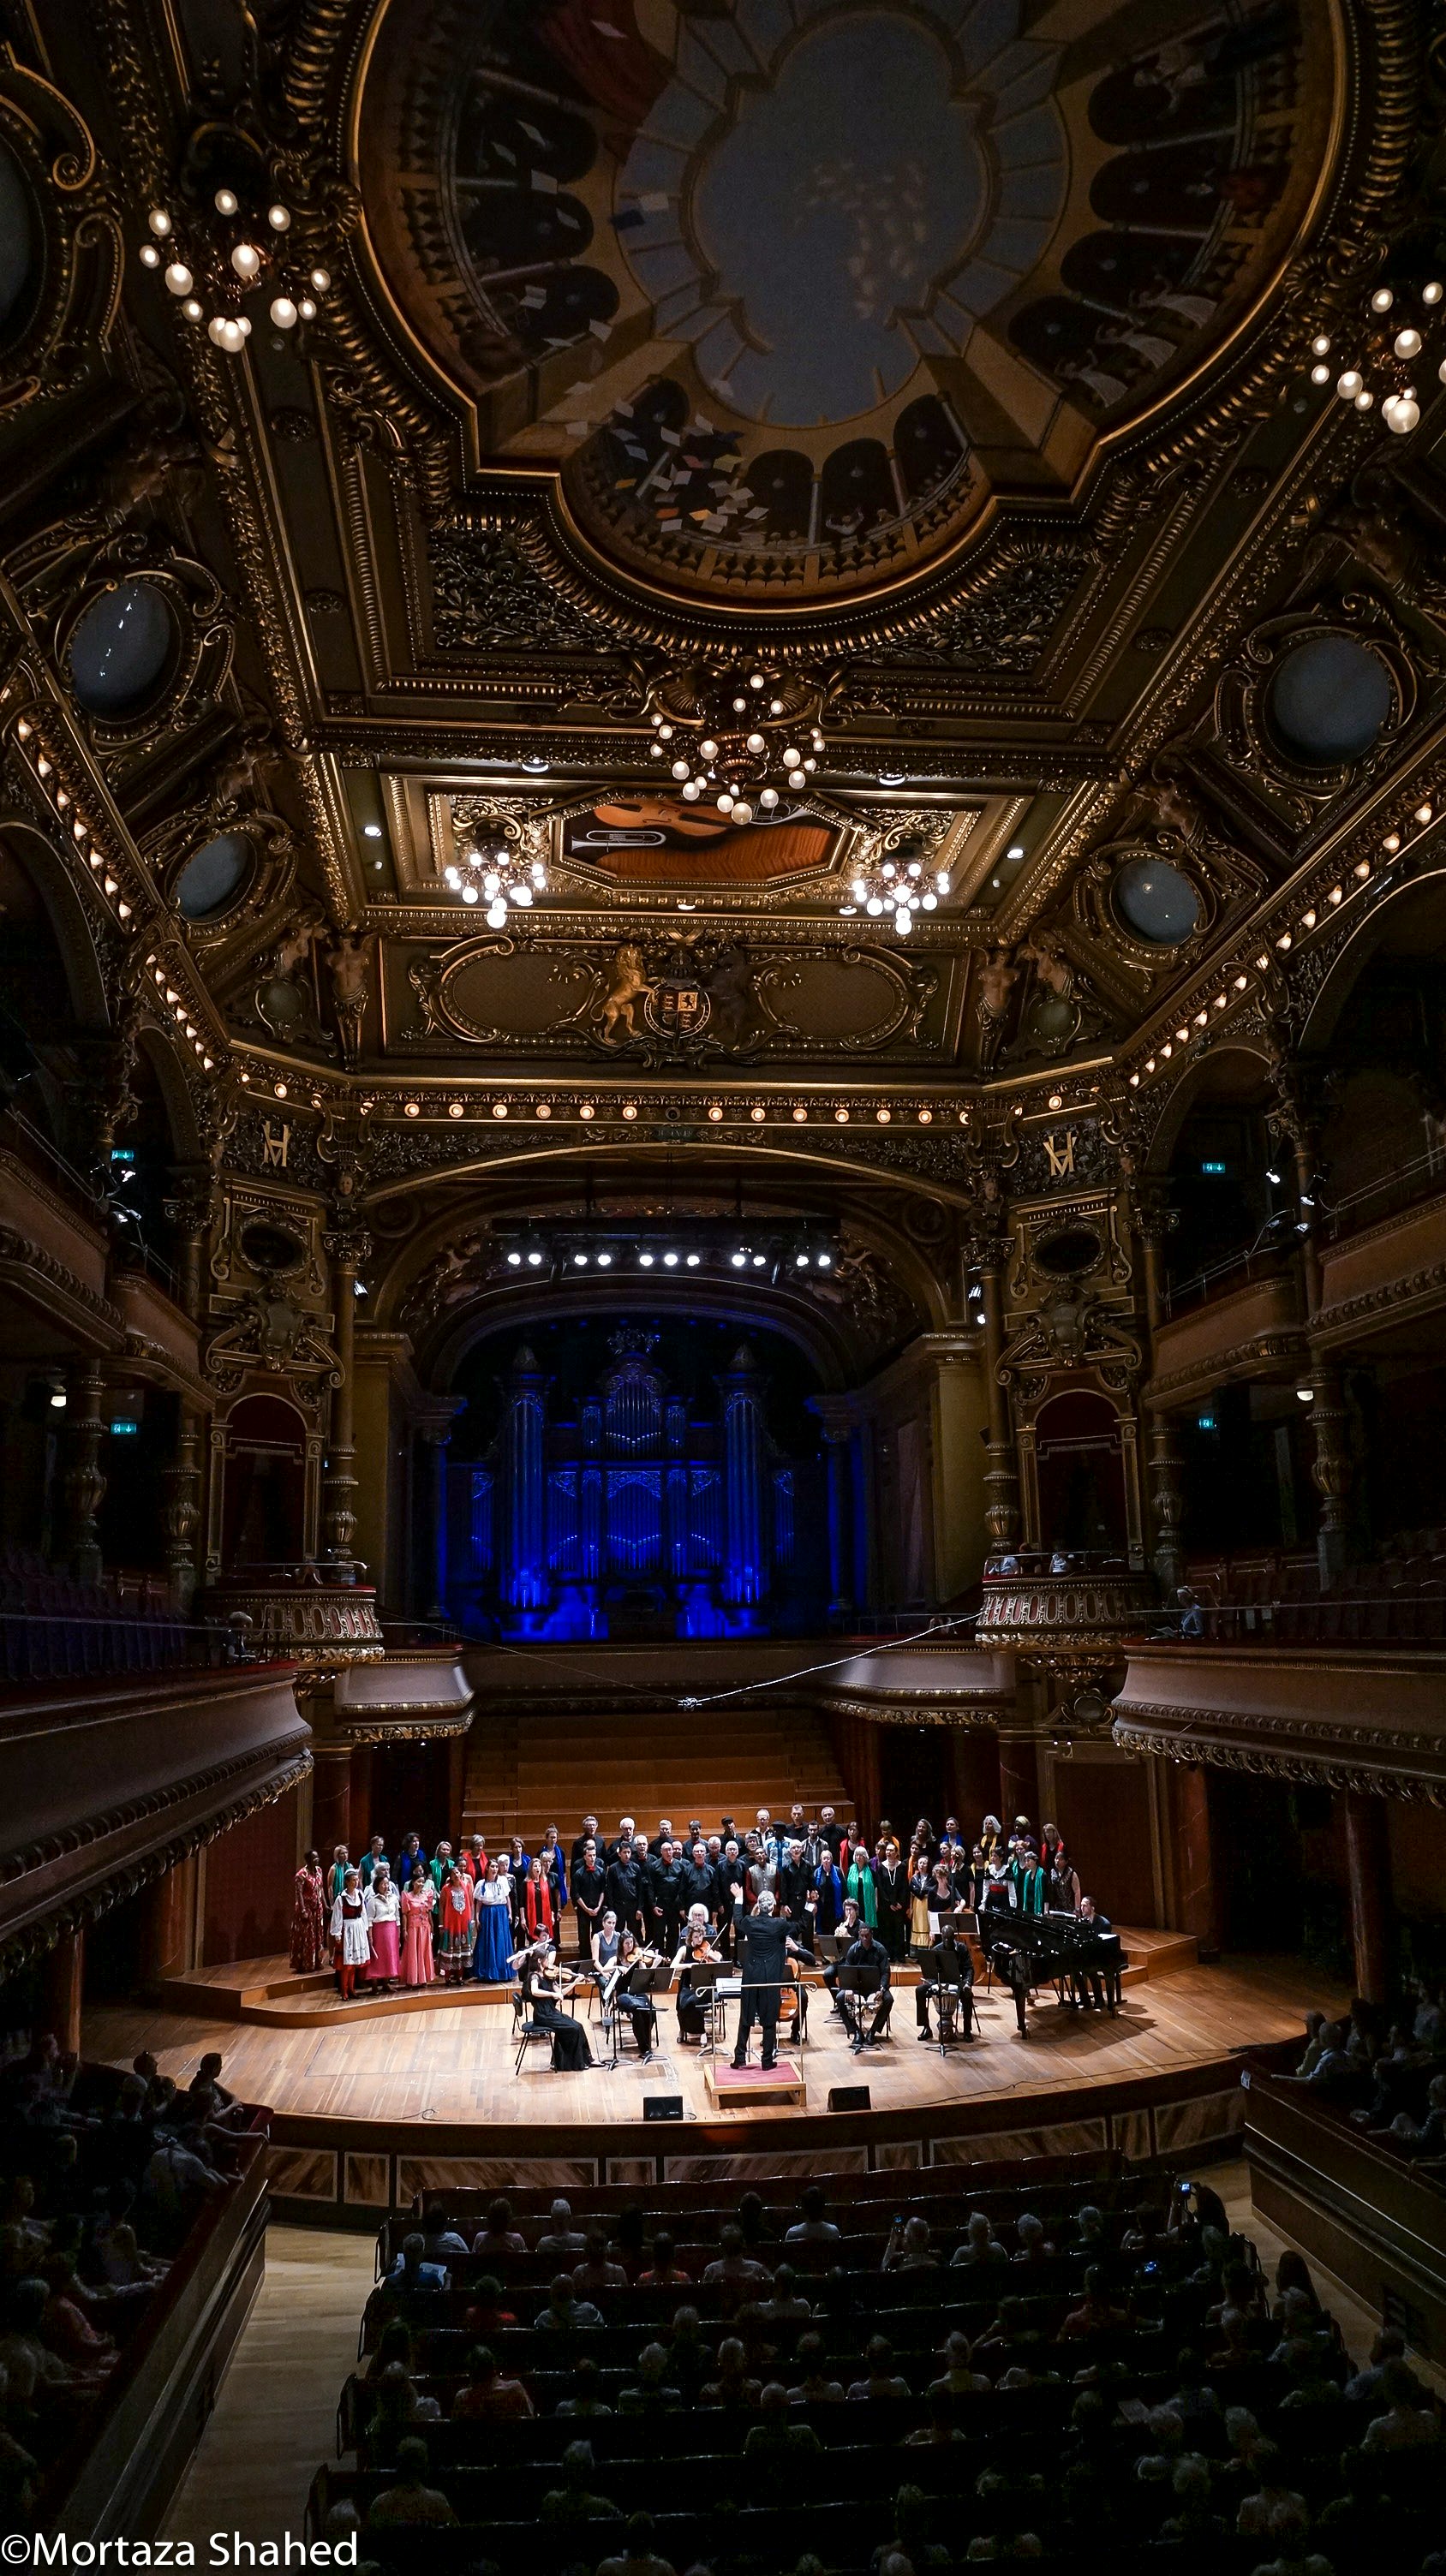 on 24.06.2017 in Geneva, Victoria hall, Choir of the nations